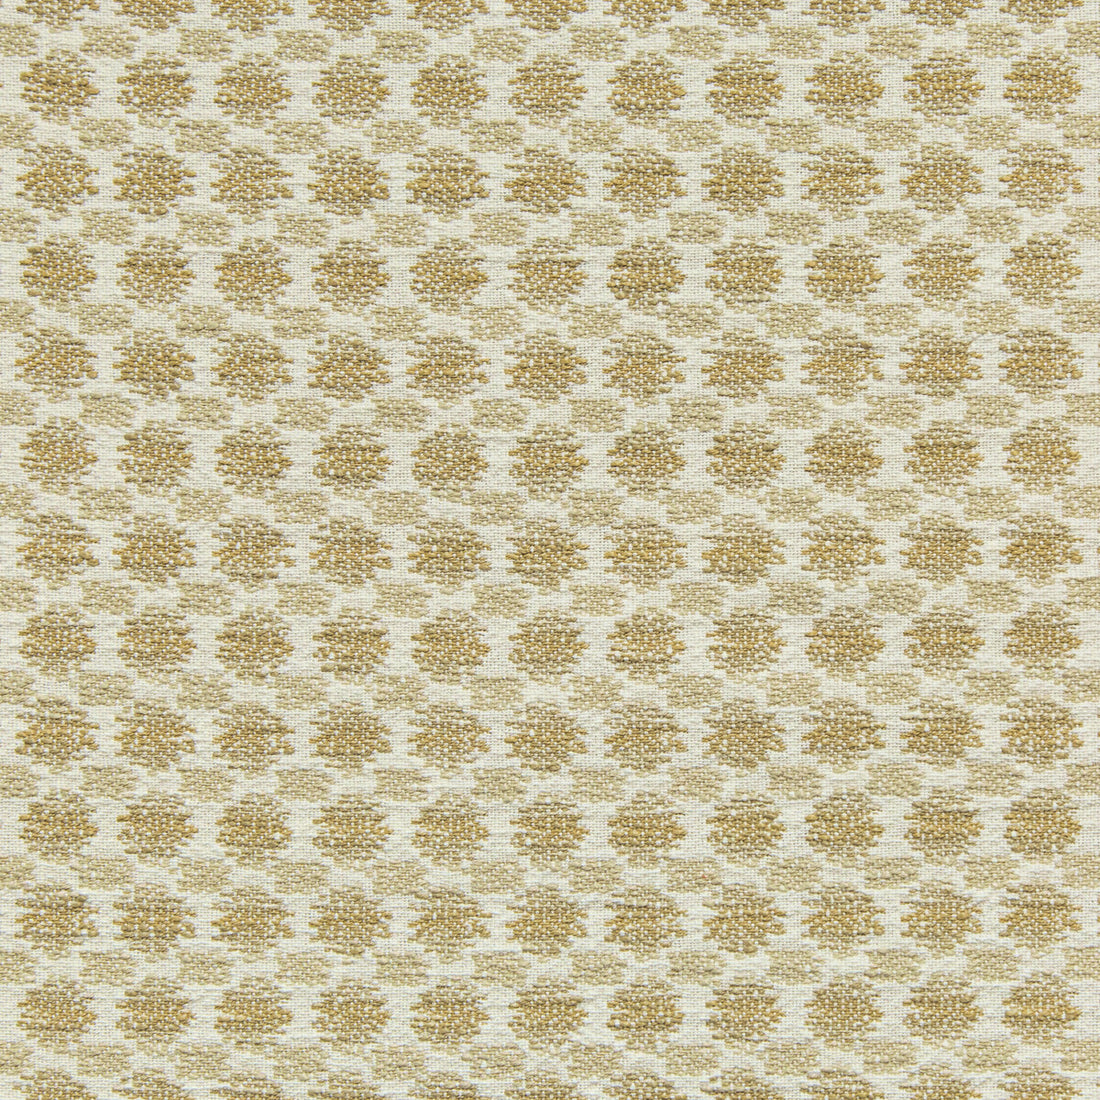 Lancing Weave fabric in sand color - pattern 2020100.16.0 - by Lee Jofa in the Linford Weaves collection